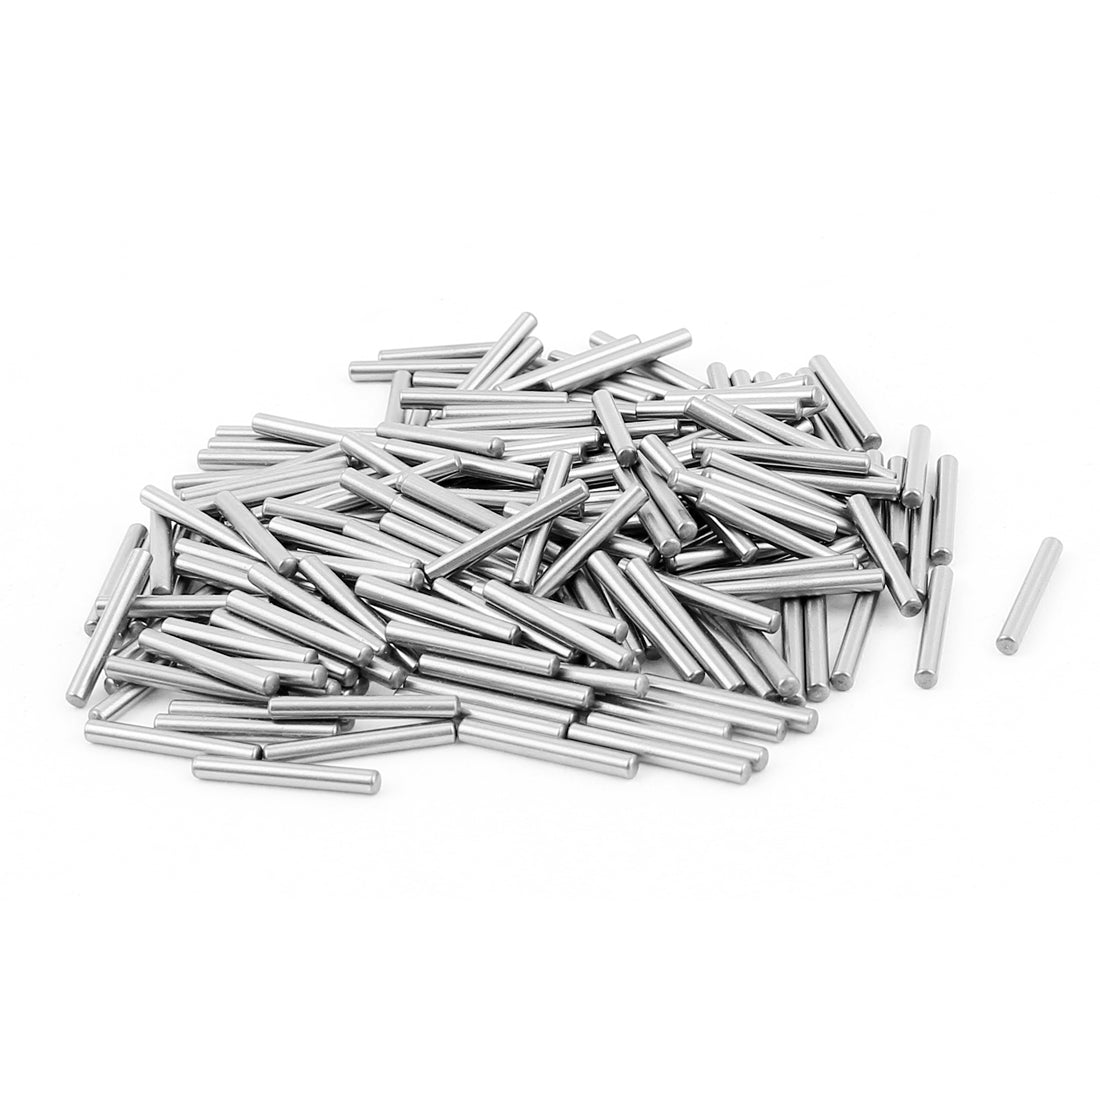 uxcell Uxcell 2mm x 15.8mm Stainless Steel Parallel Dowel Pins Fasten Elements 200pcs